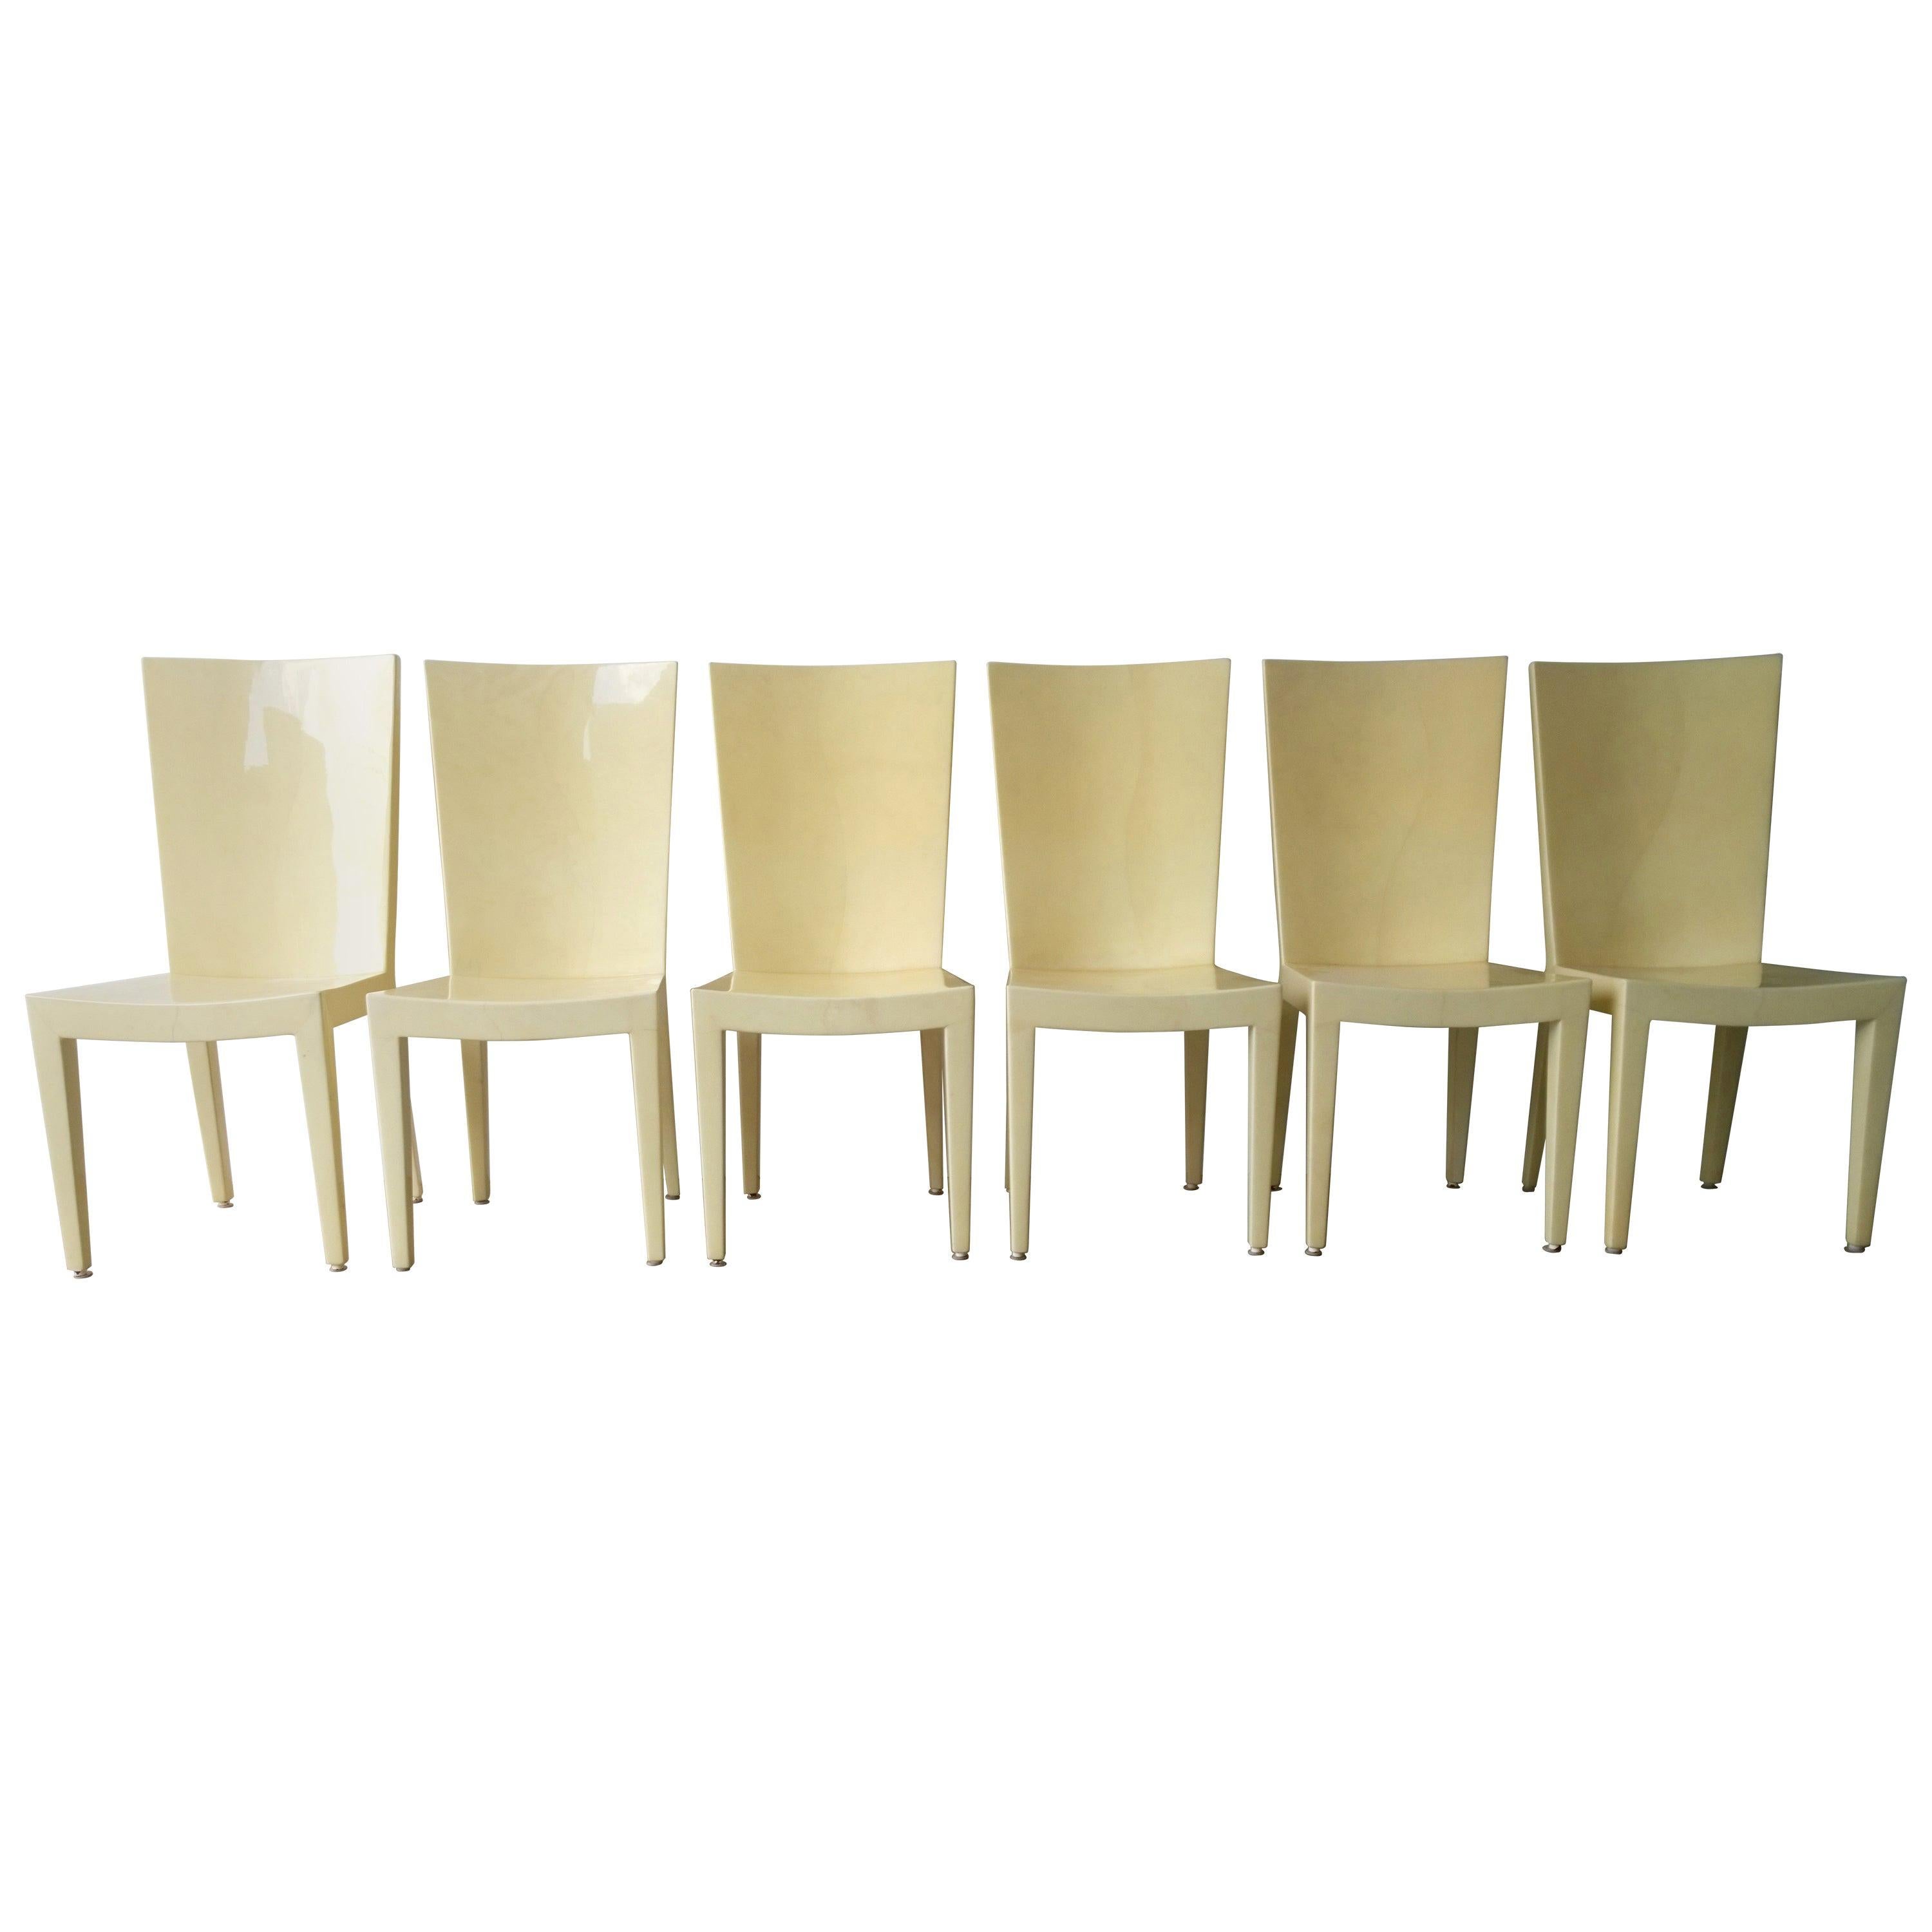 Set of 6 Eugenio Escudero Attrib Clear Lacquered Natural Goatskin Dining Chairs